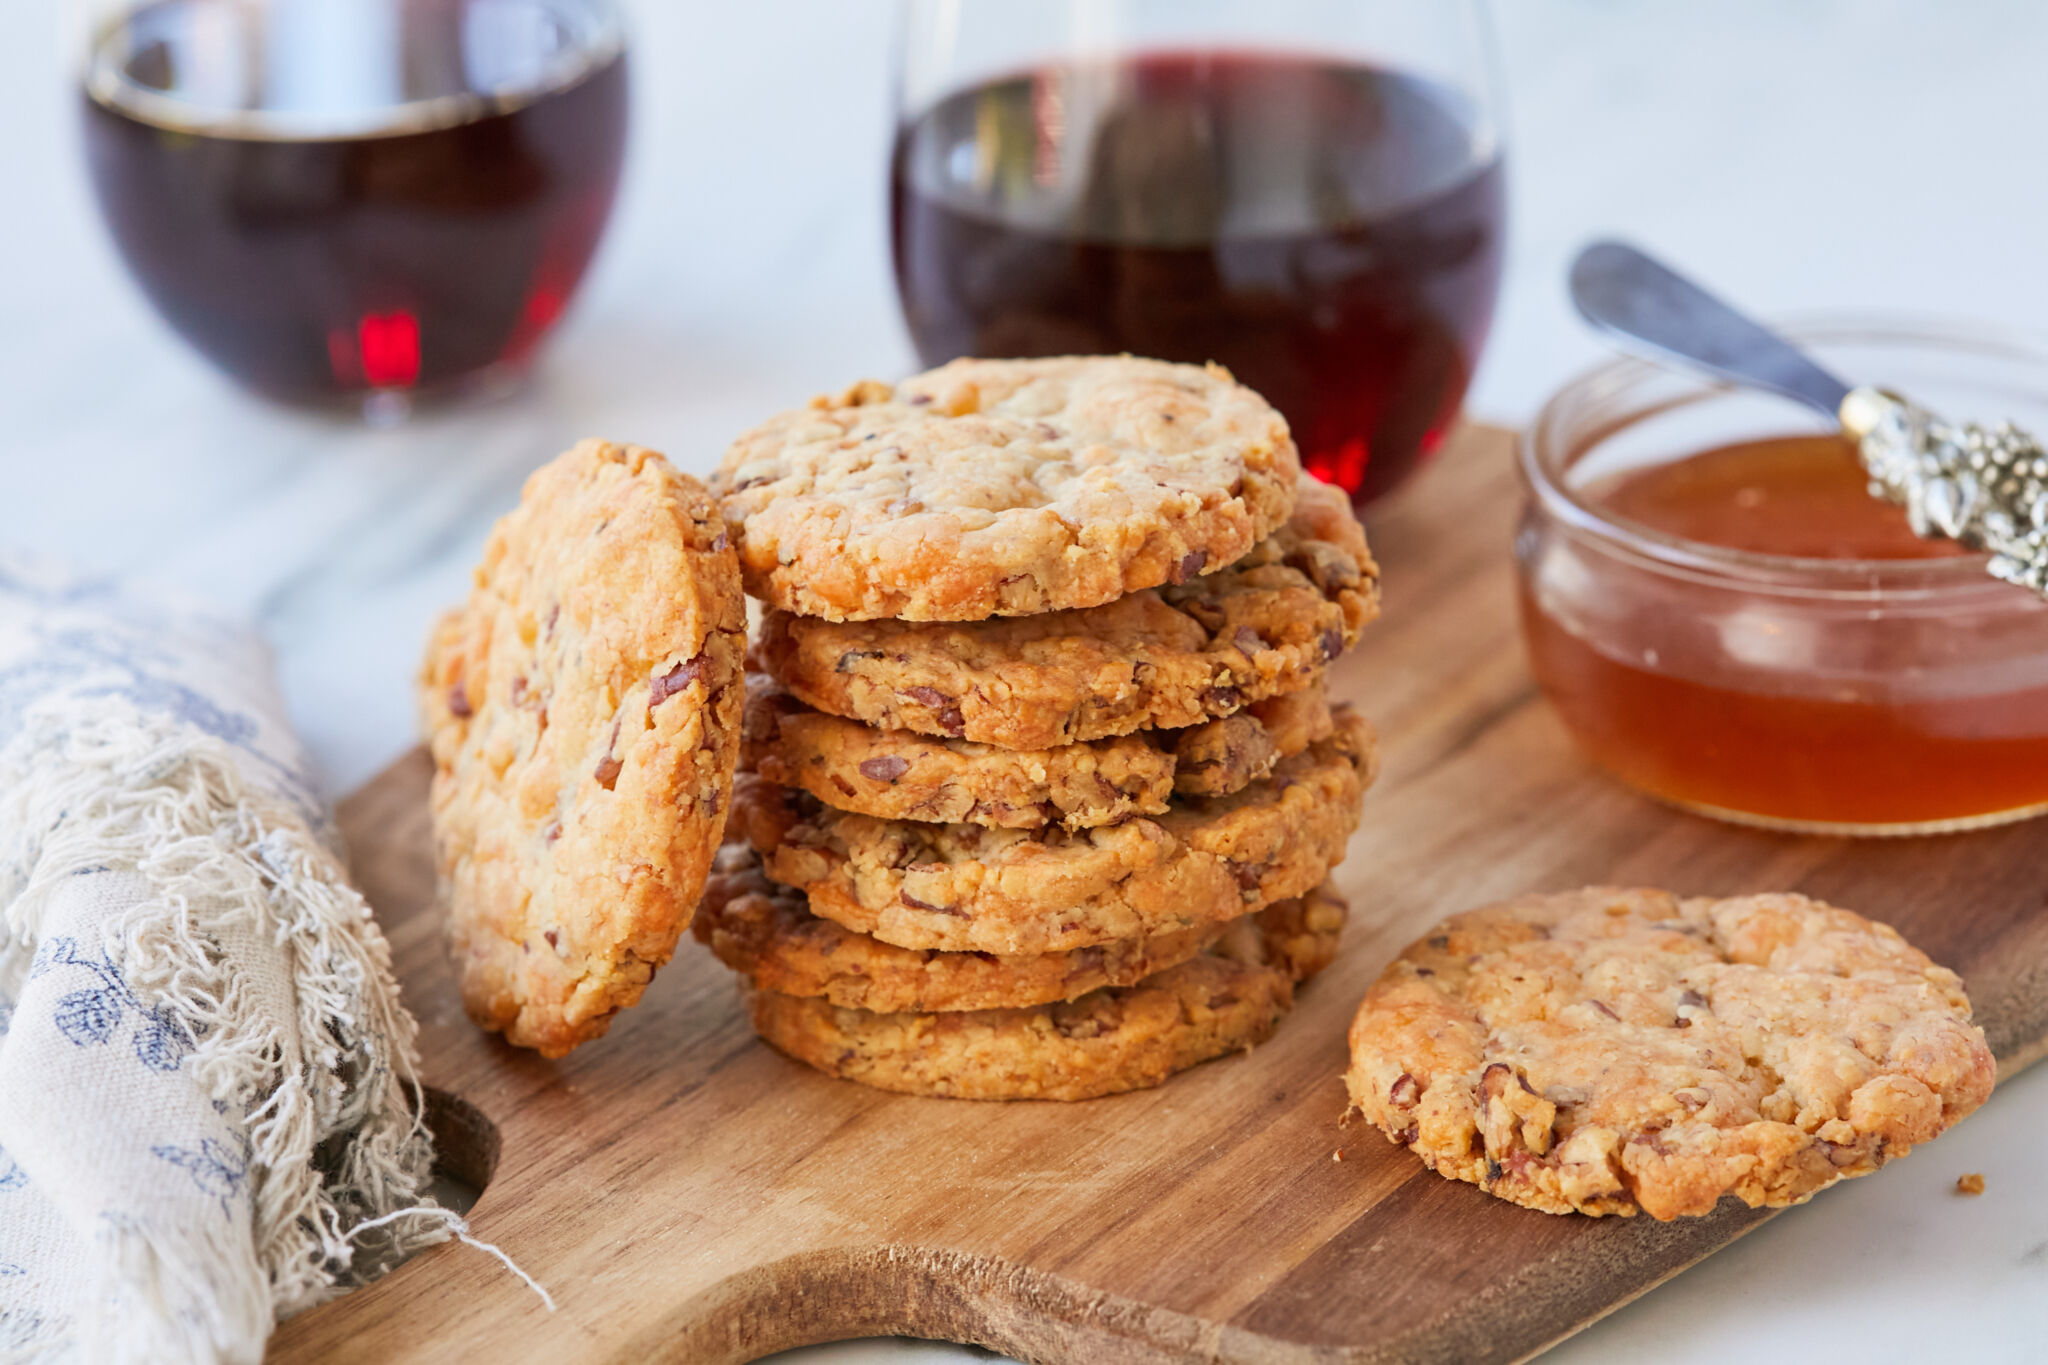 Savory, crispy, and crumbly cheesy cheddar and pecan shortbread cookies served with wine and honey.